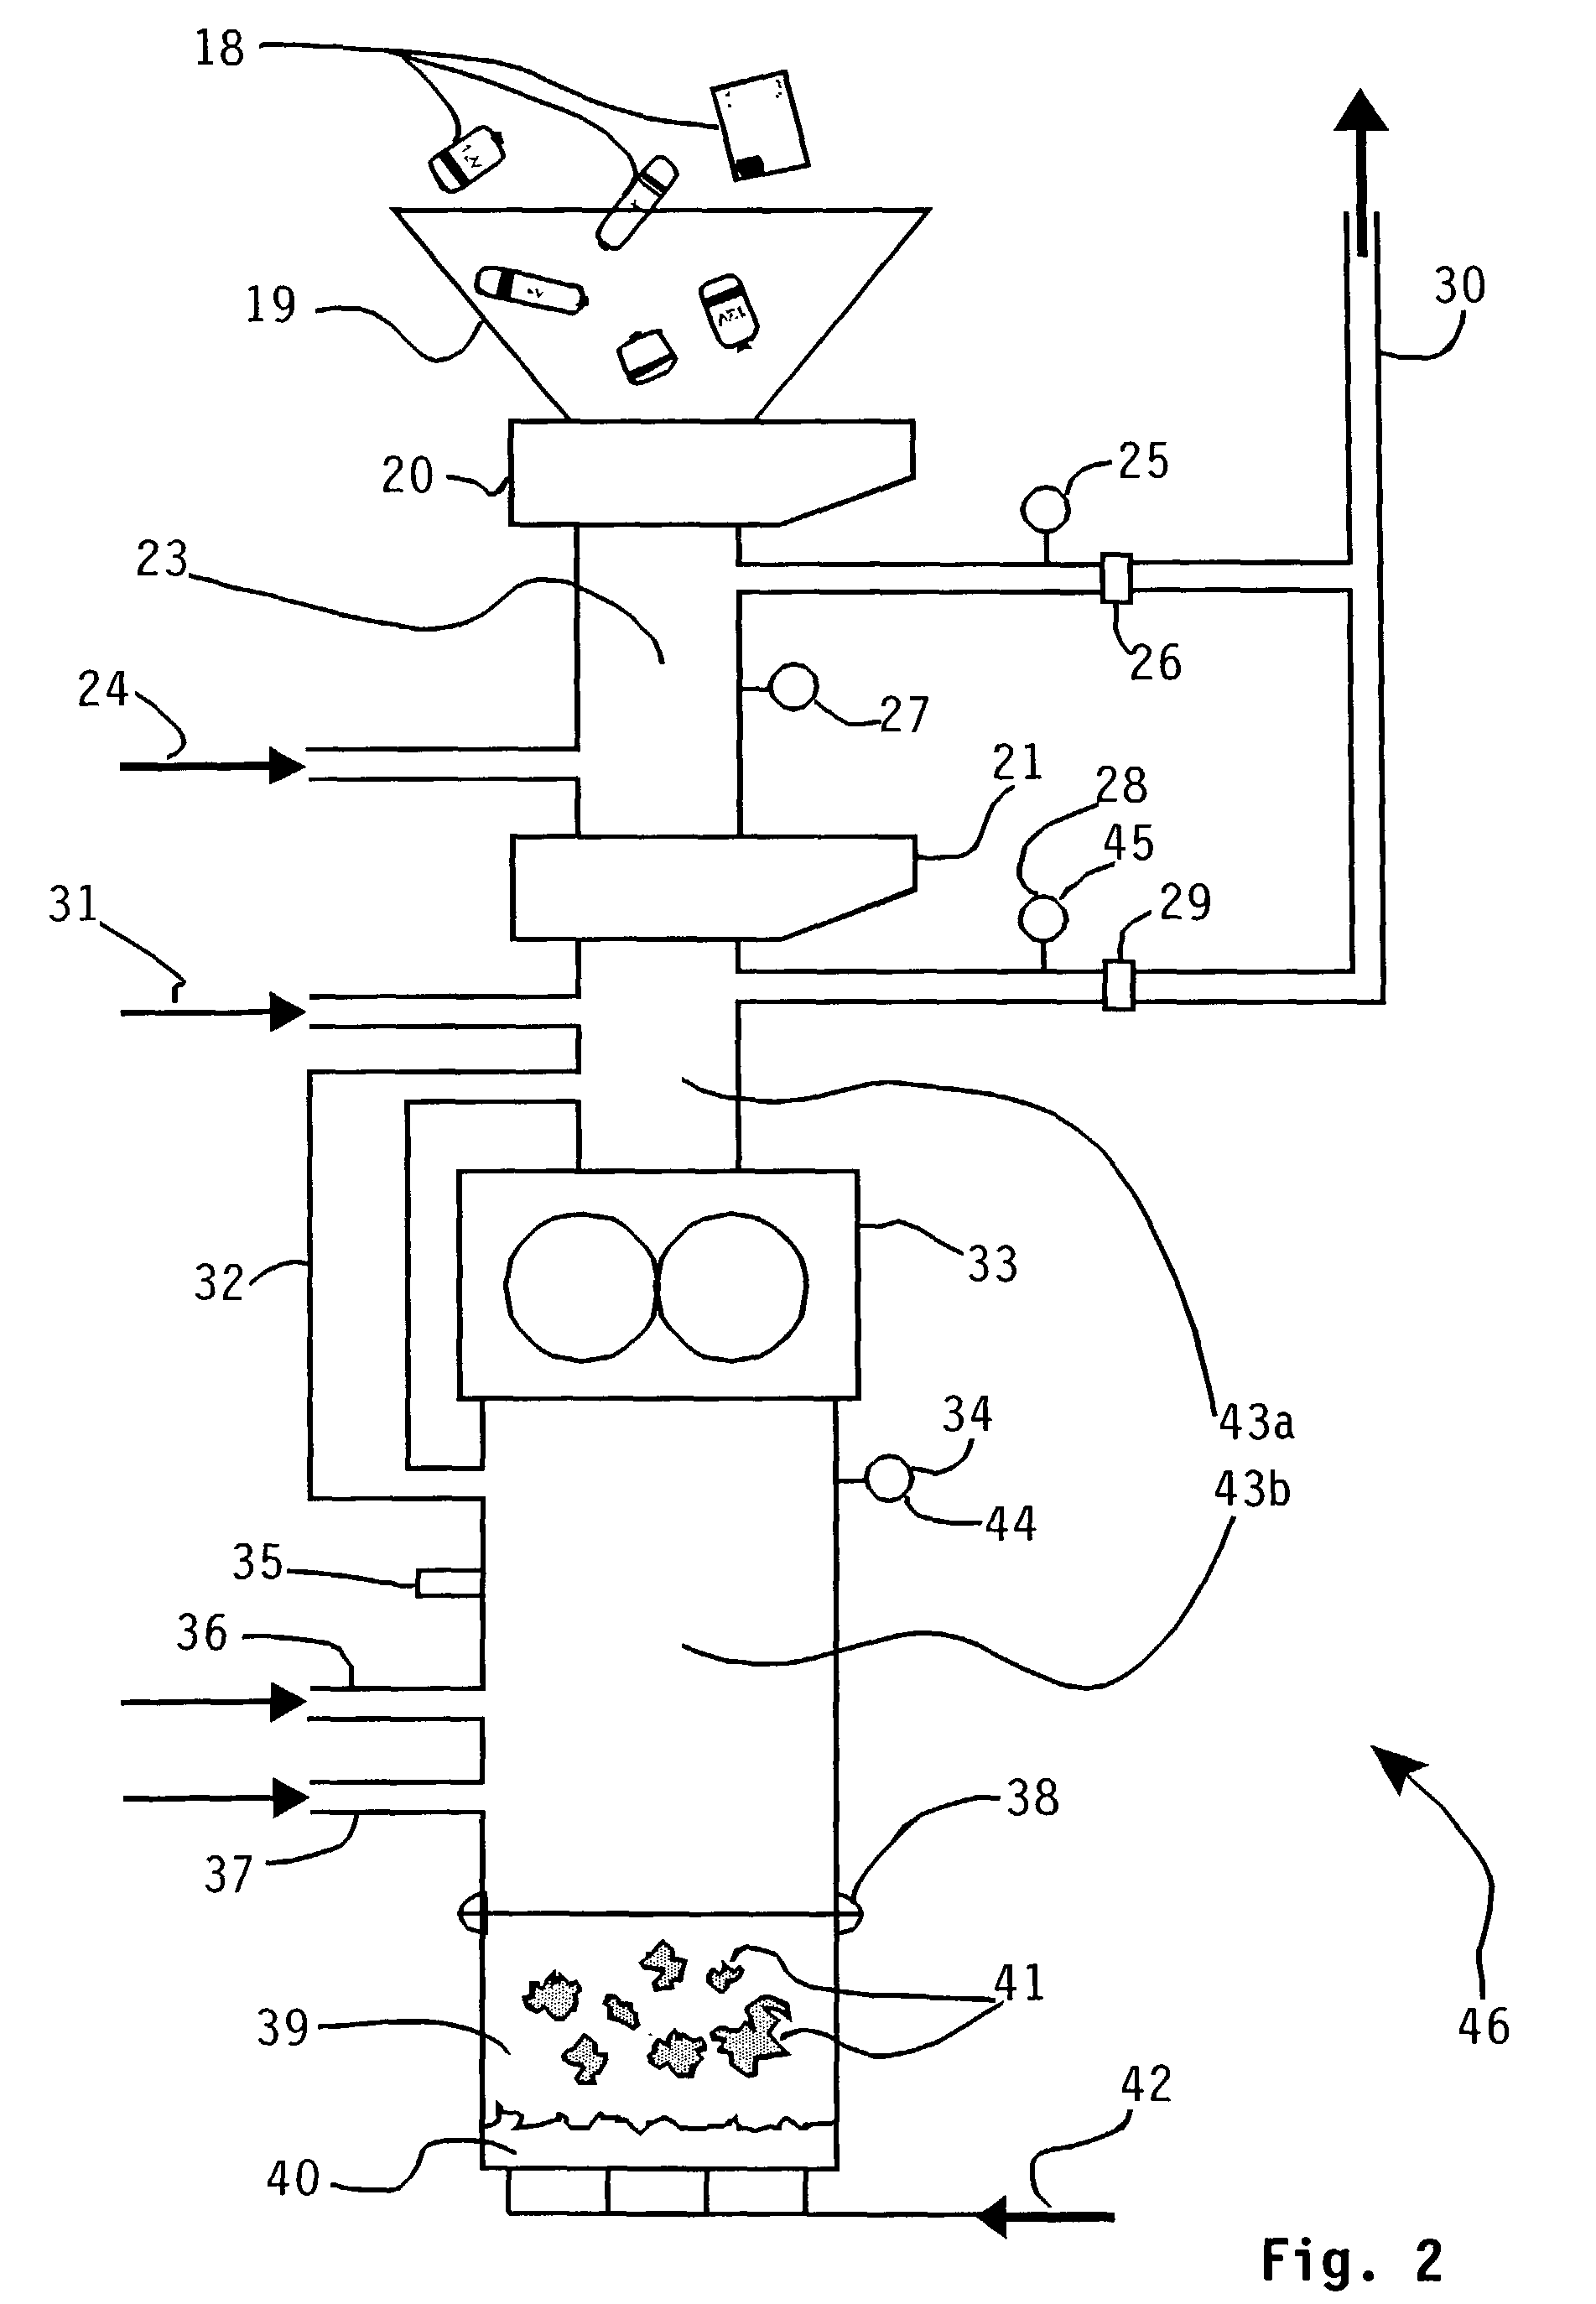 Method of and apparatus for dismantling and storage of objects comprising alkali metals, such as alkali metal containing batteries